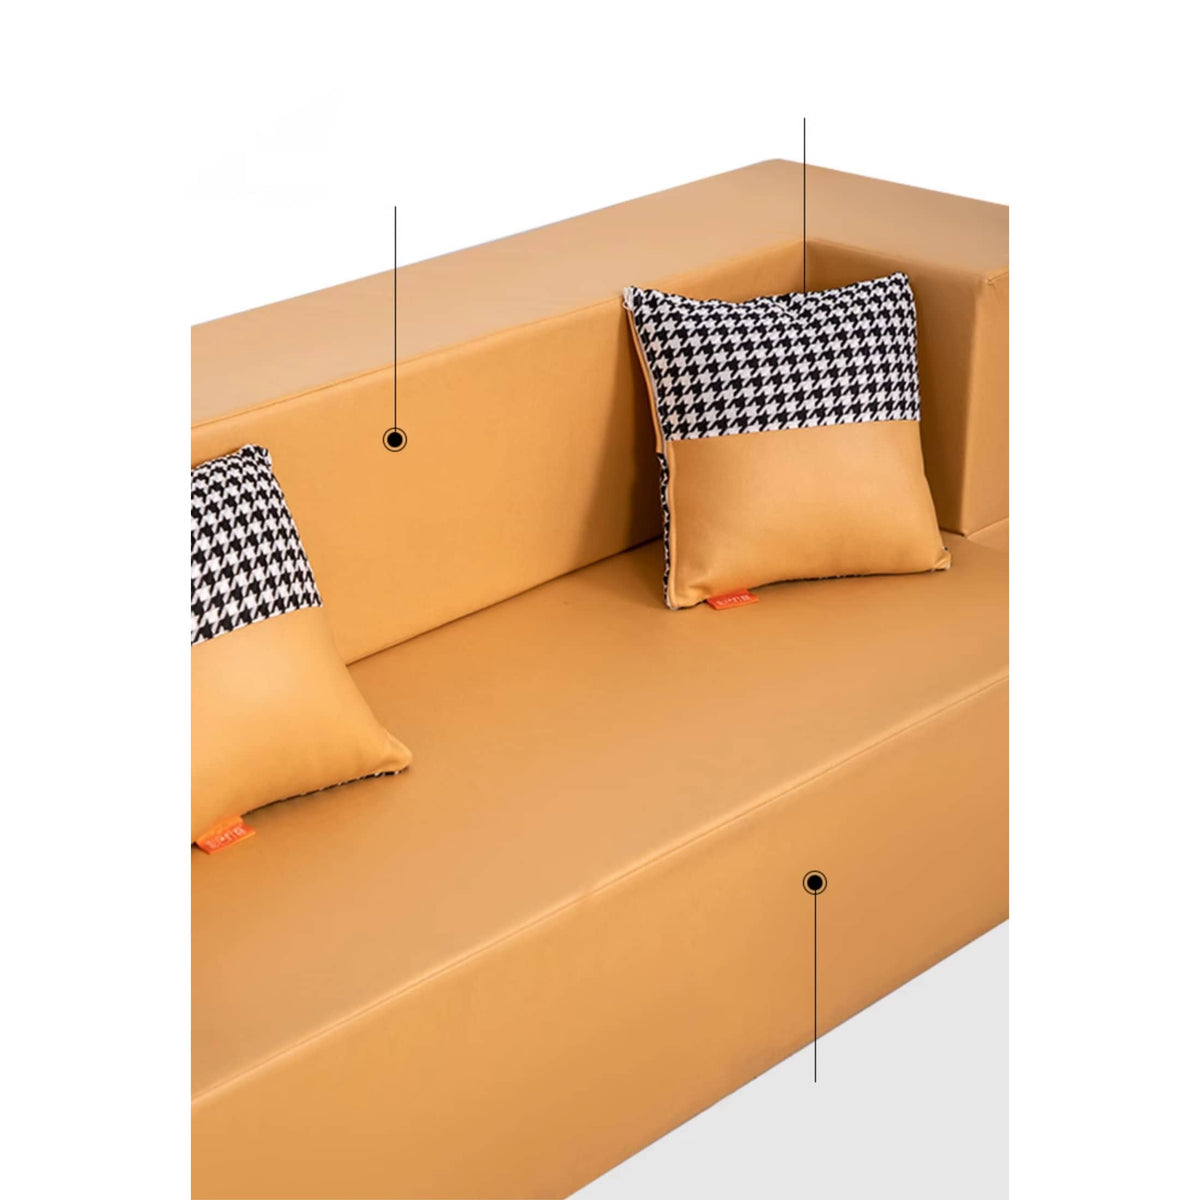 Stylish Yellow Orange Grey Leathaire Sofa Bed - Ultimate Comfort with Foam and Figure Cotton fcsnm-910